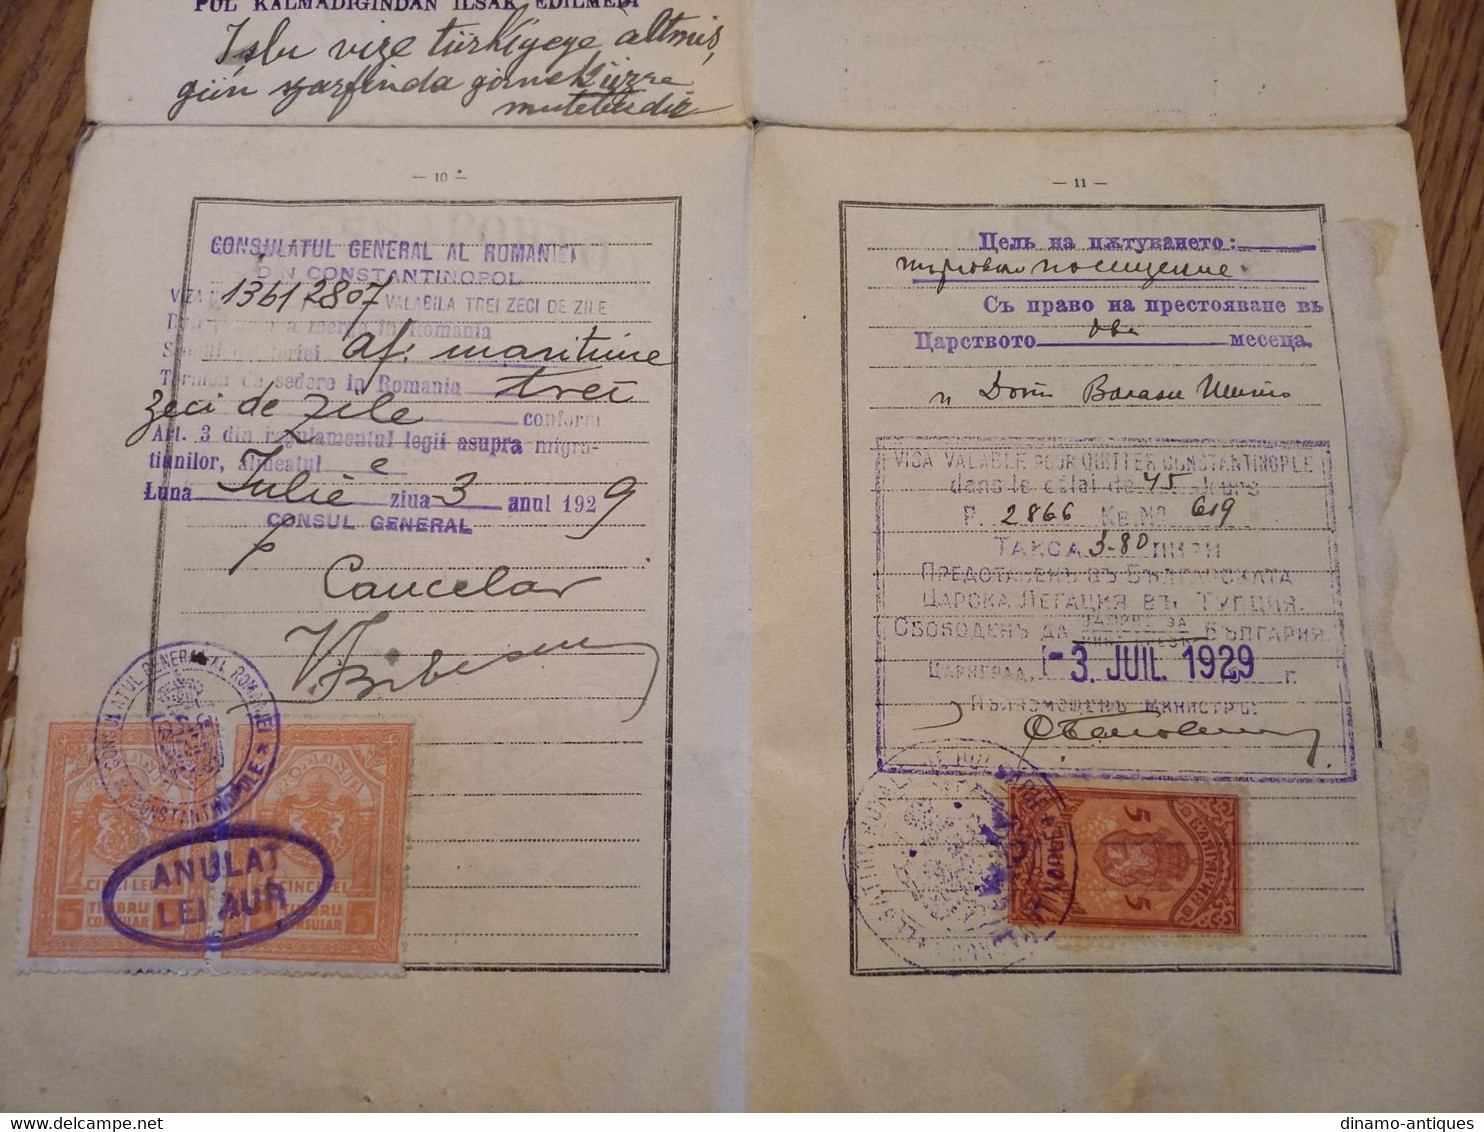 1929 Italy passport passeport issued in Constantinople Turkey with travel to Romania Bulgaria rare type revenues fiscal